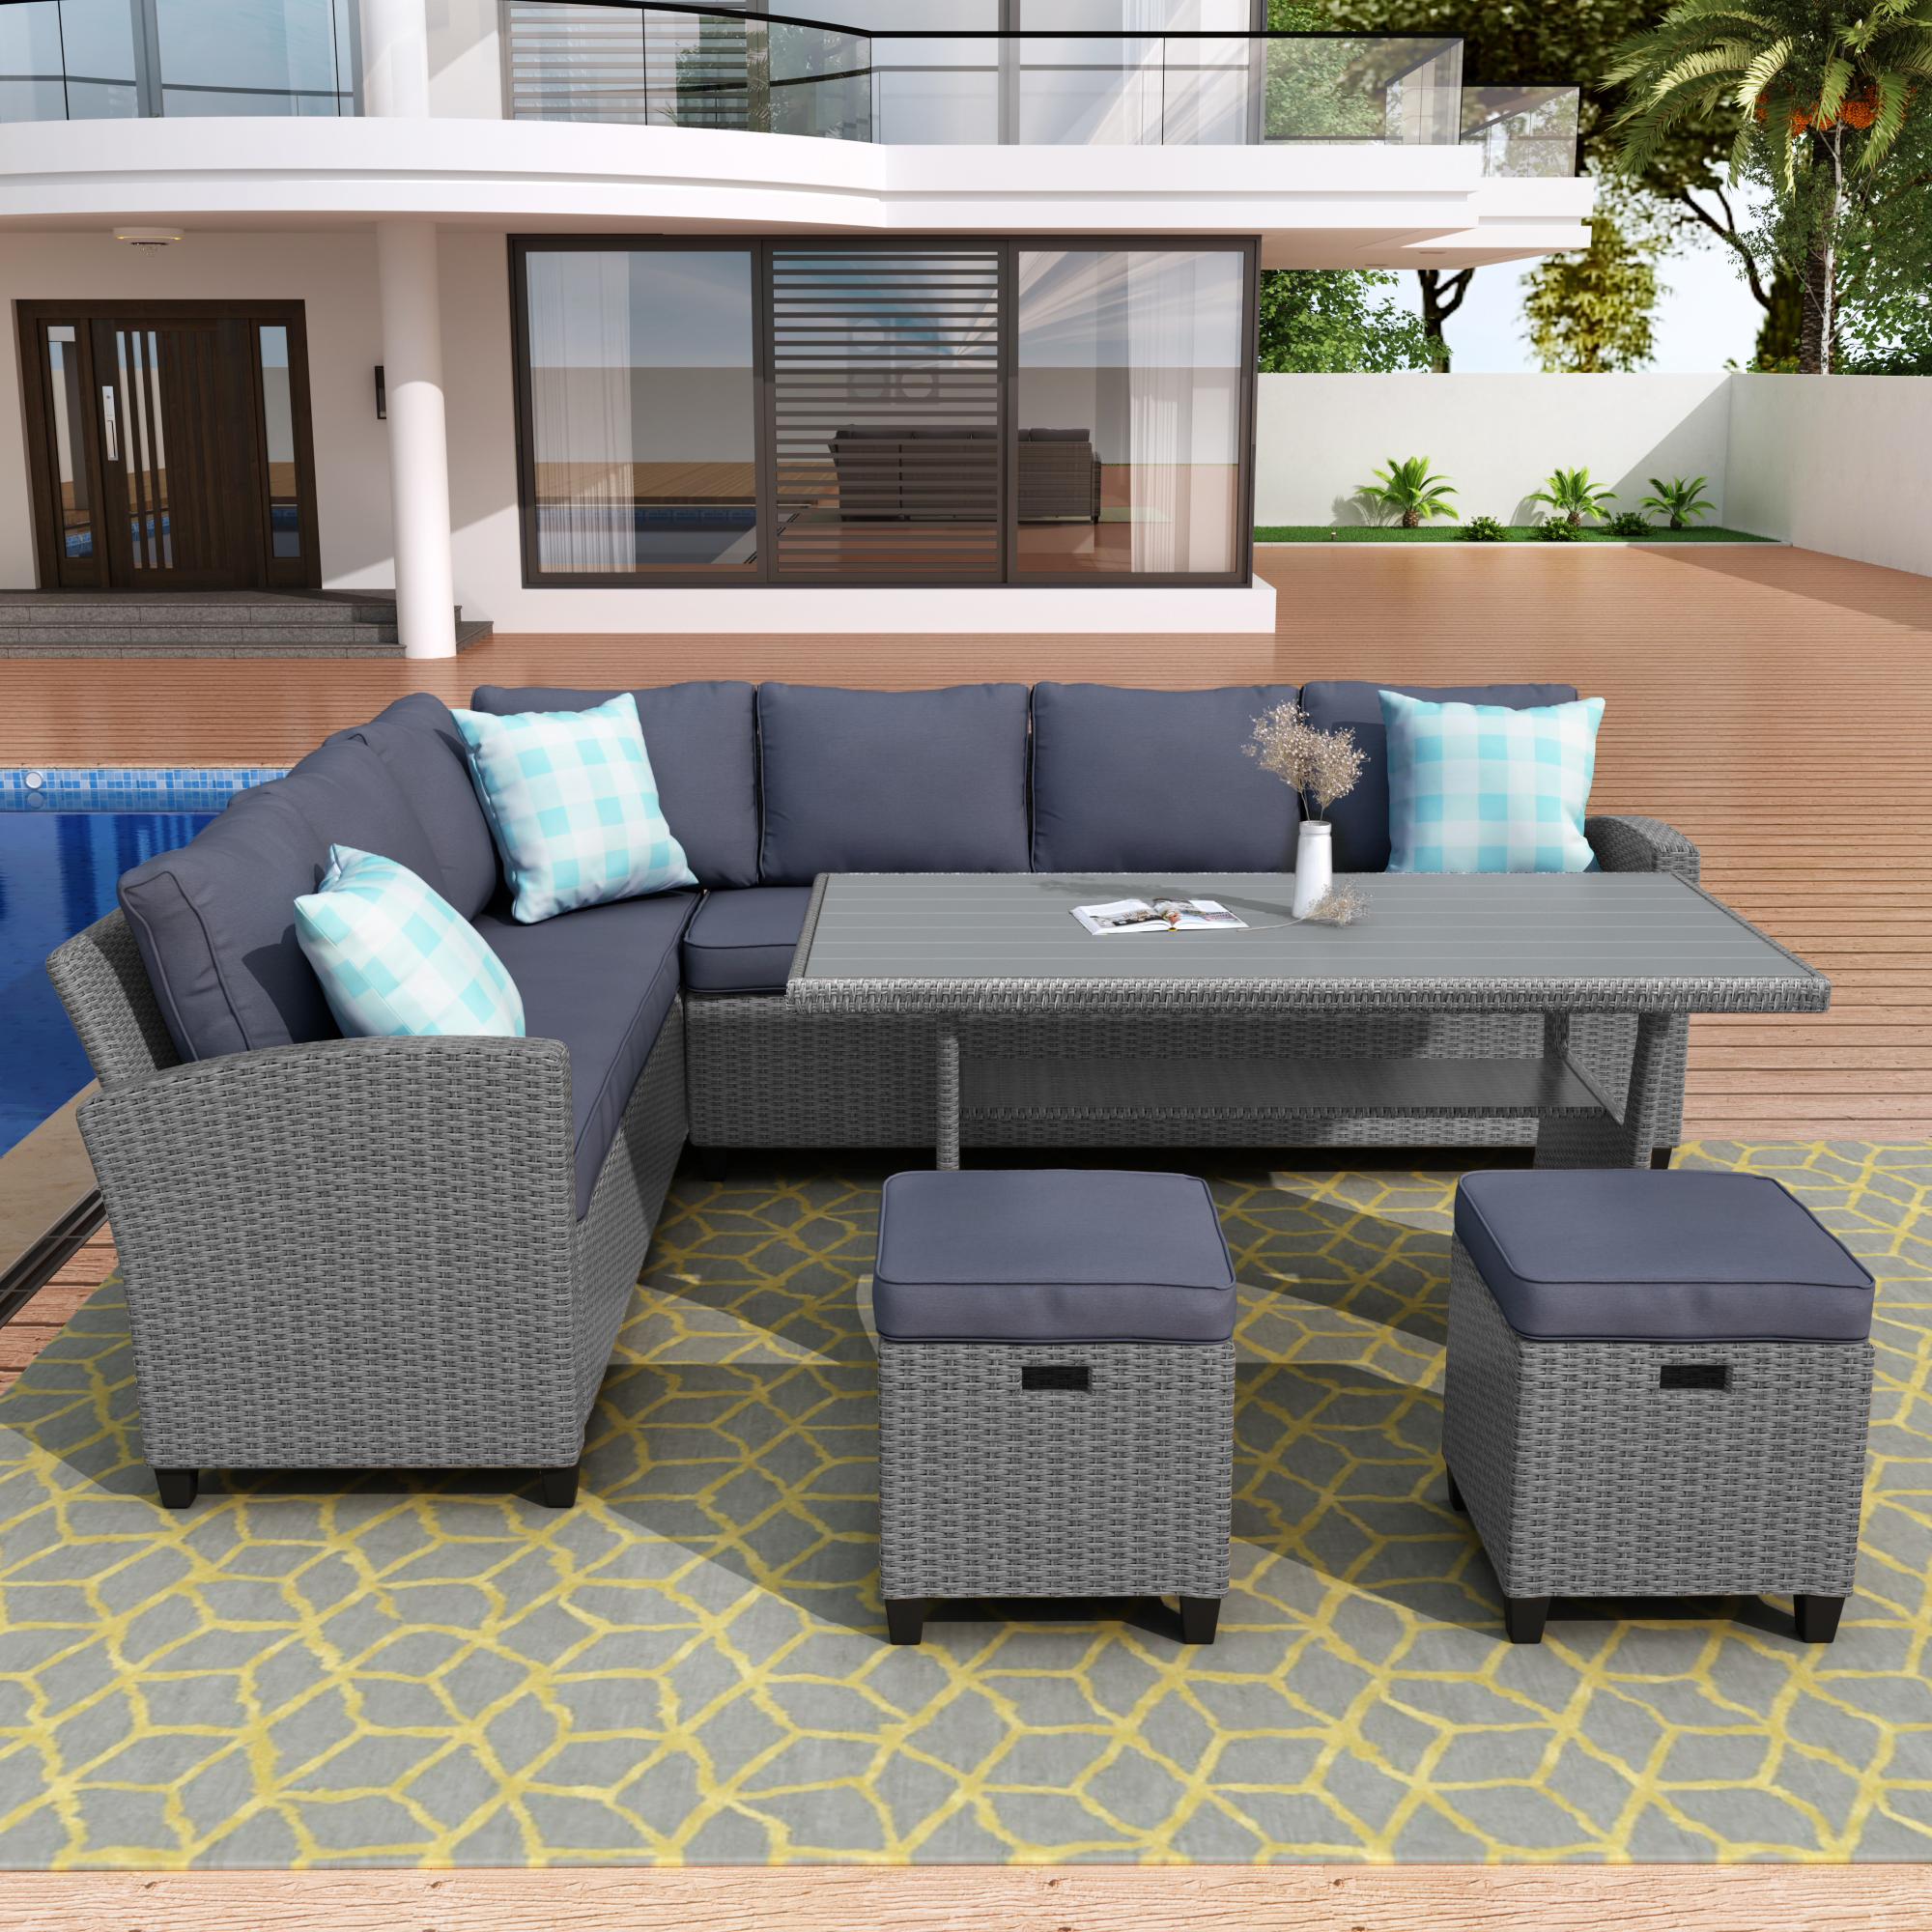 5 Piece Outdoor Conversation Set,  Dining Table Chair With Ottoman And Throw Pillows - WY000076EAA